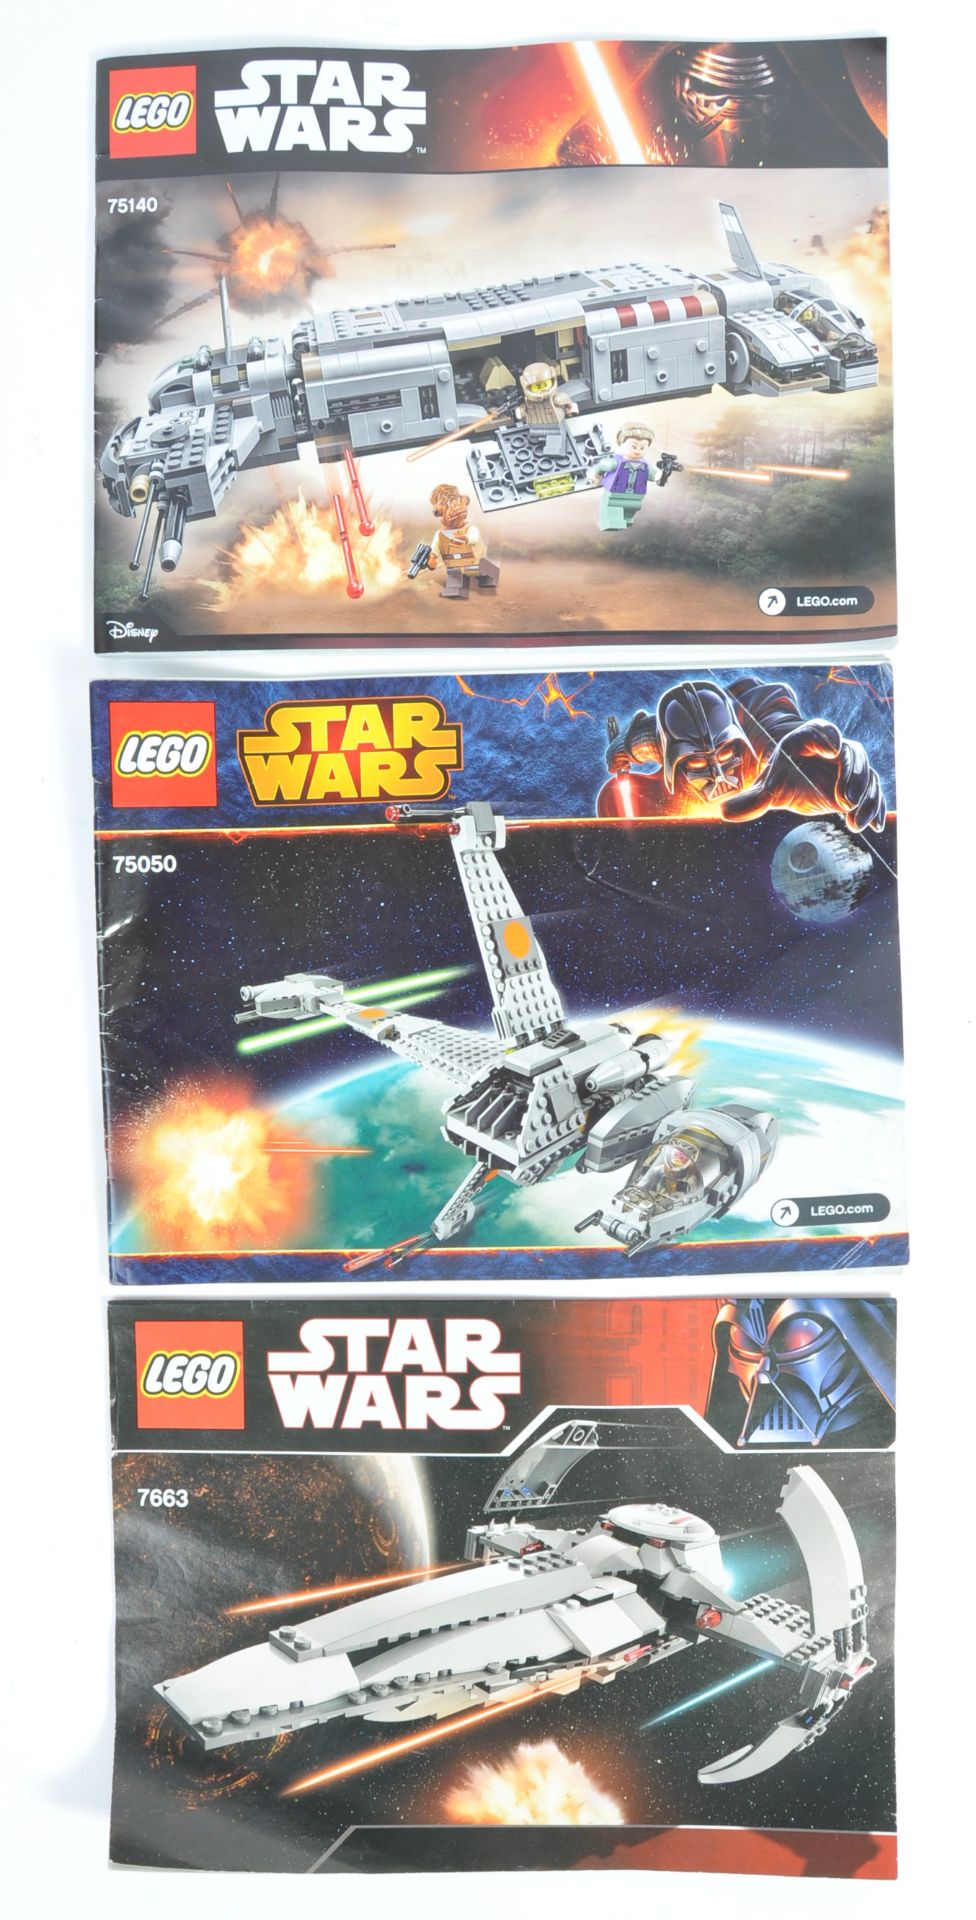 LEGO SETS - STAR WARS - 75140 / 75050 / 7663 - UNBOXED